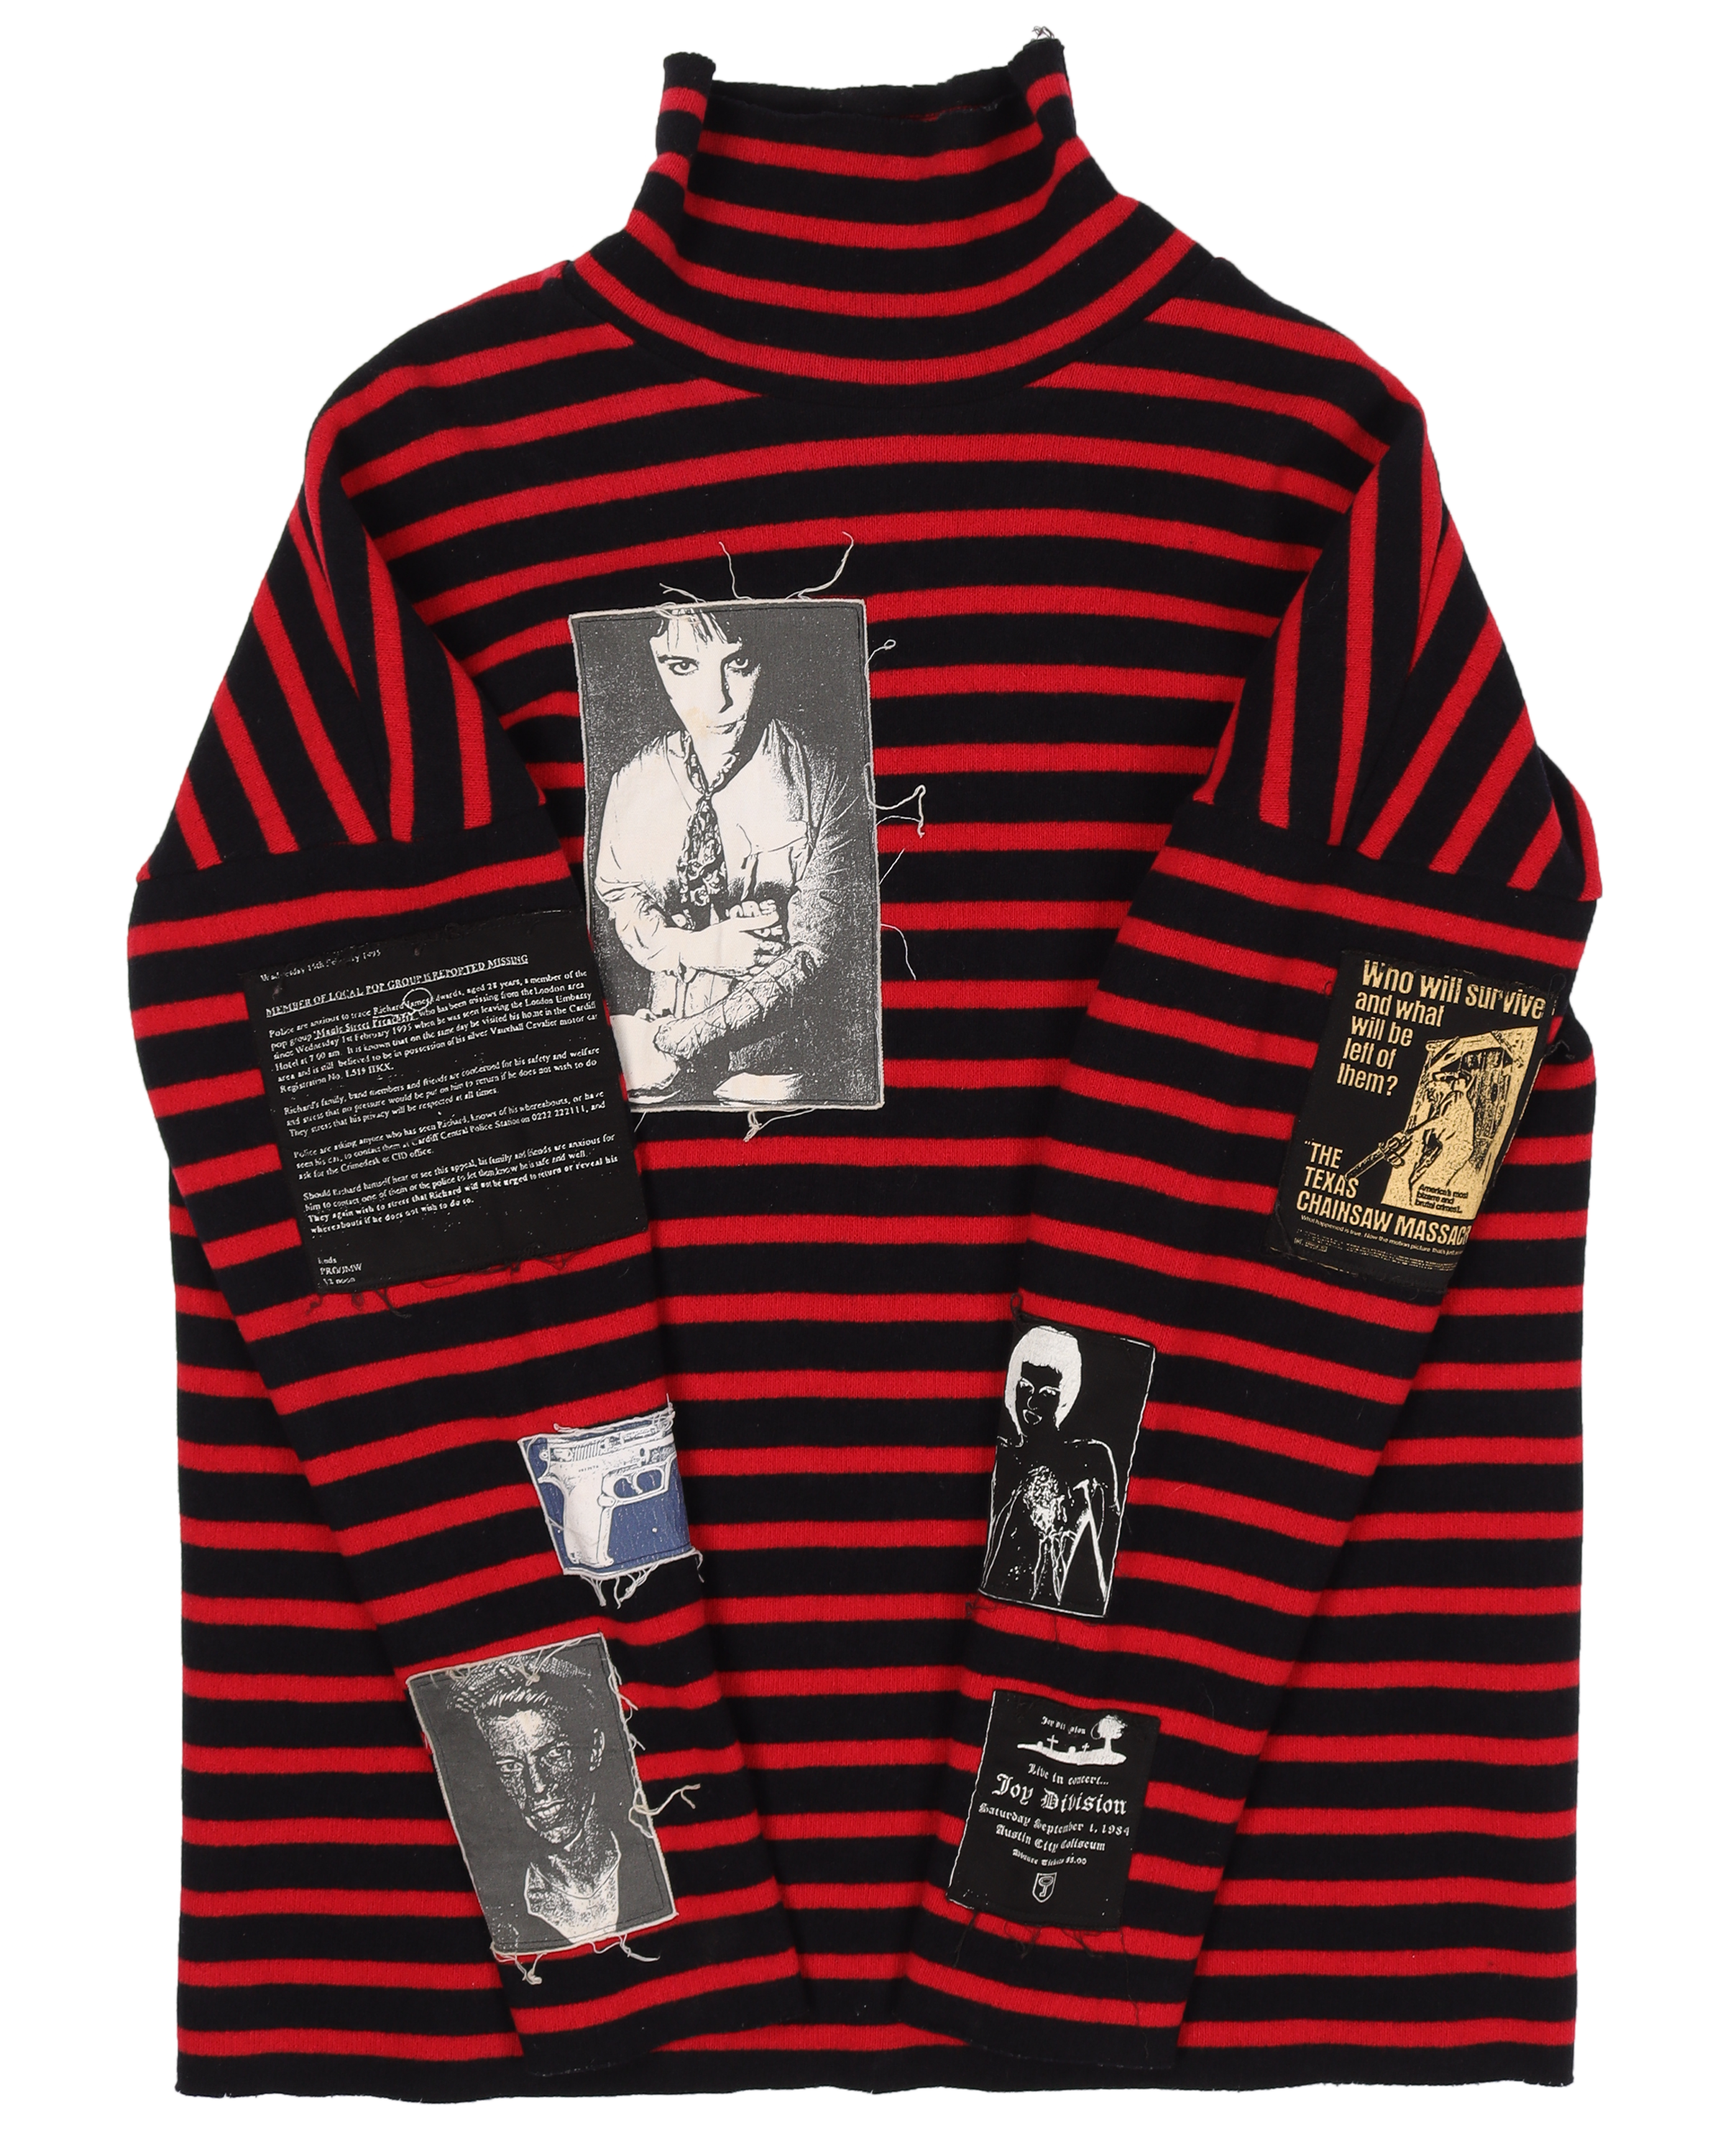 AW 2001 Riot Riot Riot Patched Sweater